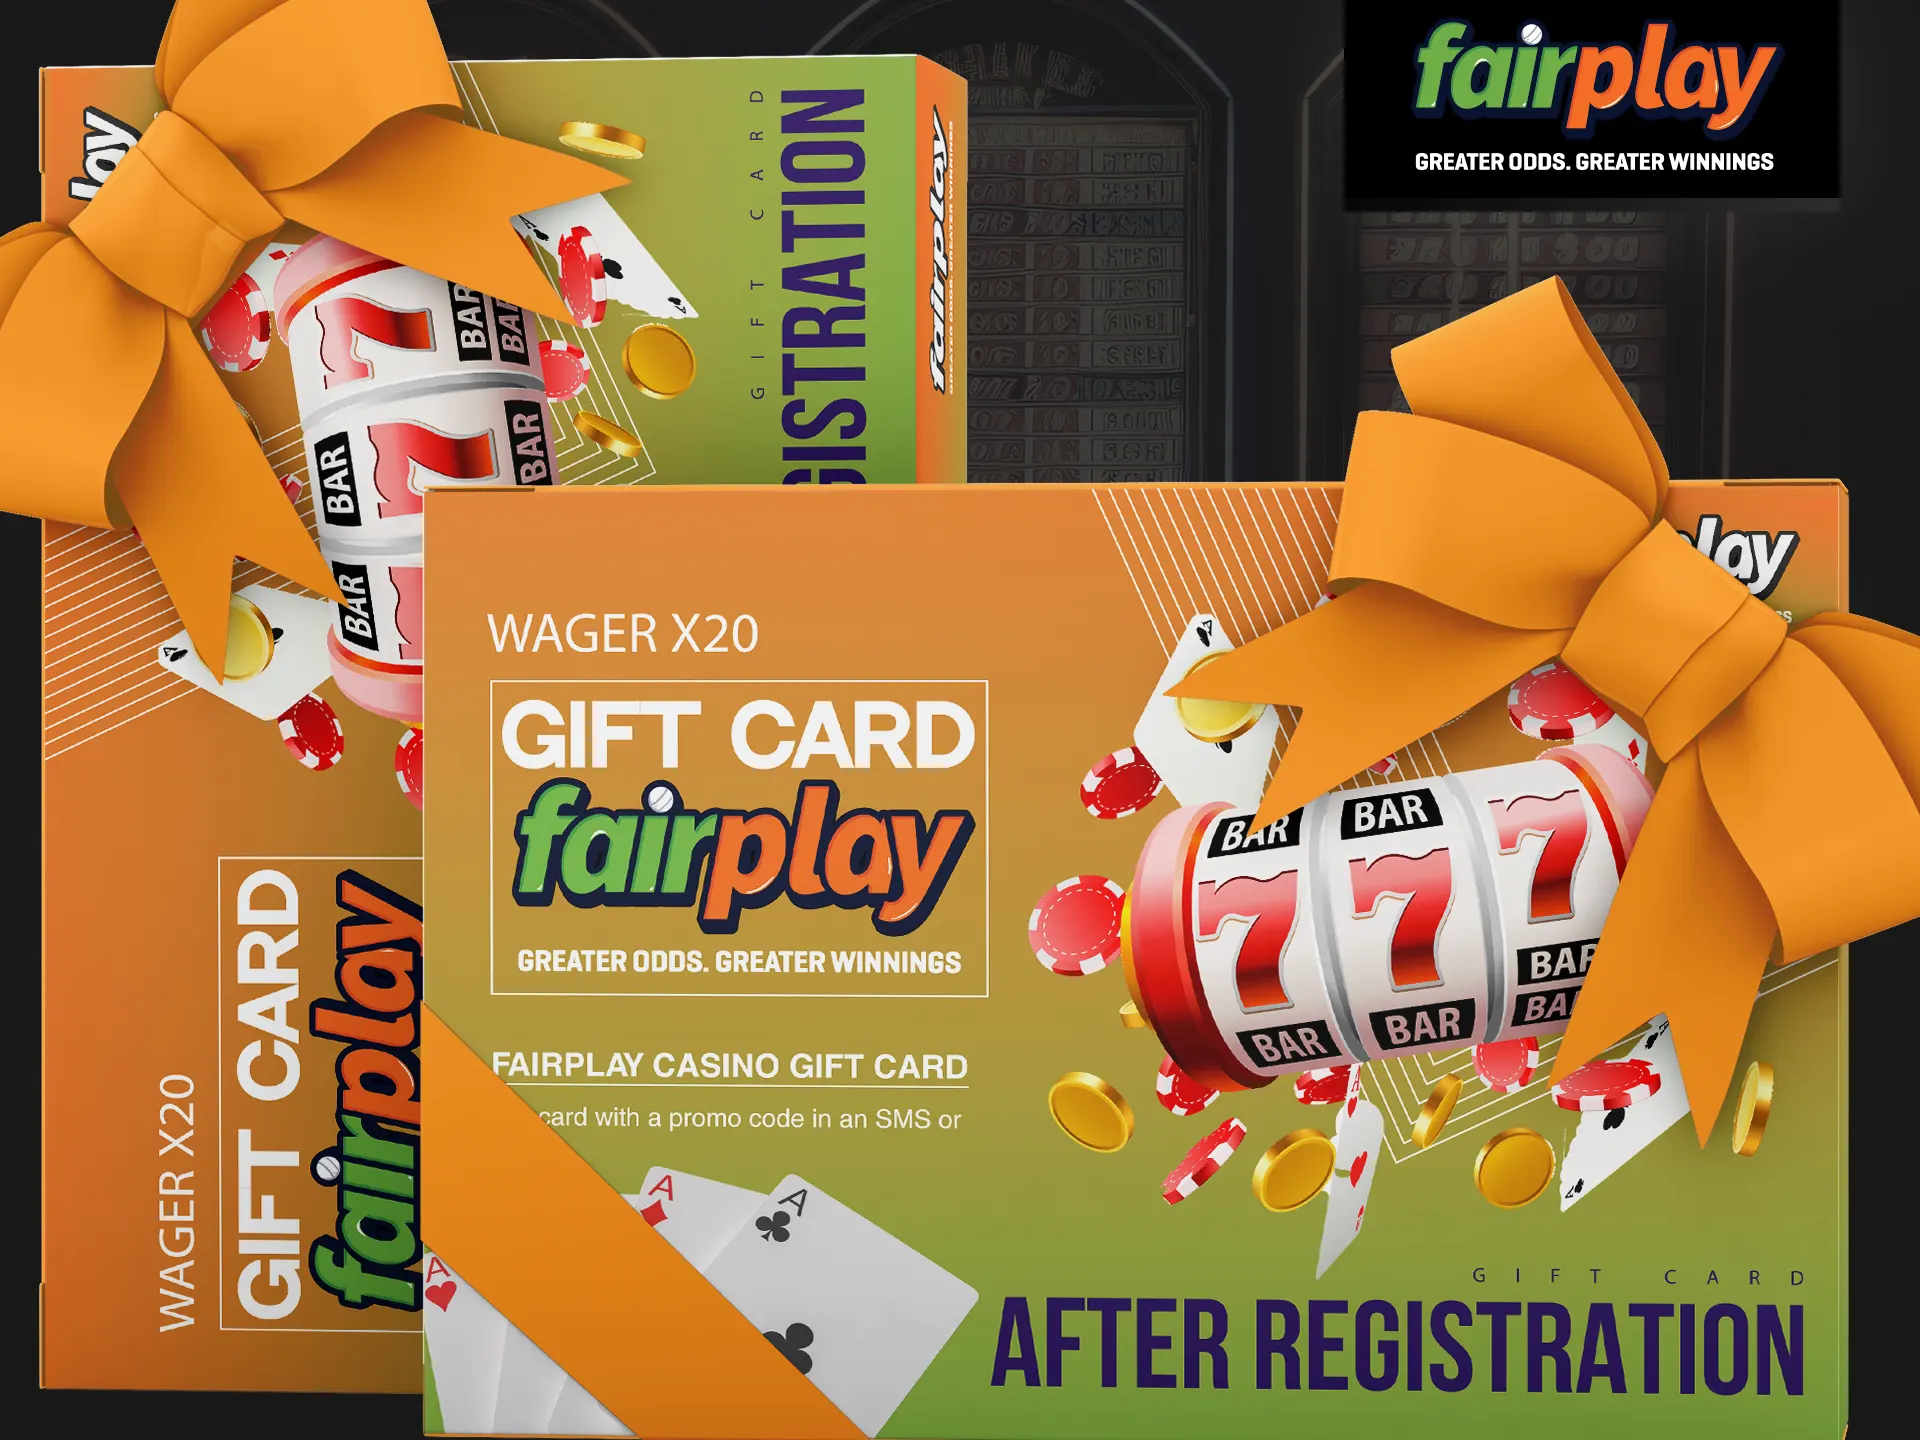 Upon signing up, receive a Fairplay`s gift card via SMS or email for bonus activation.